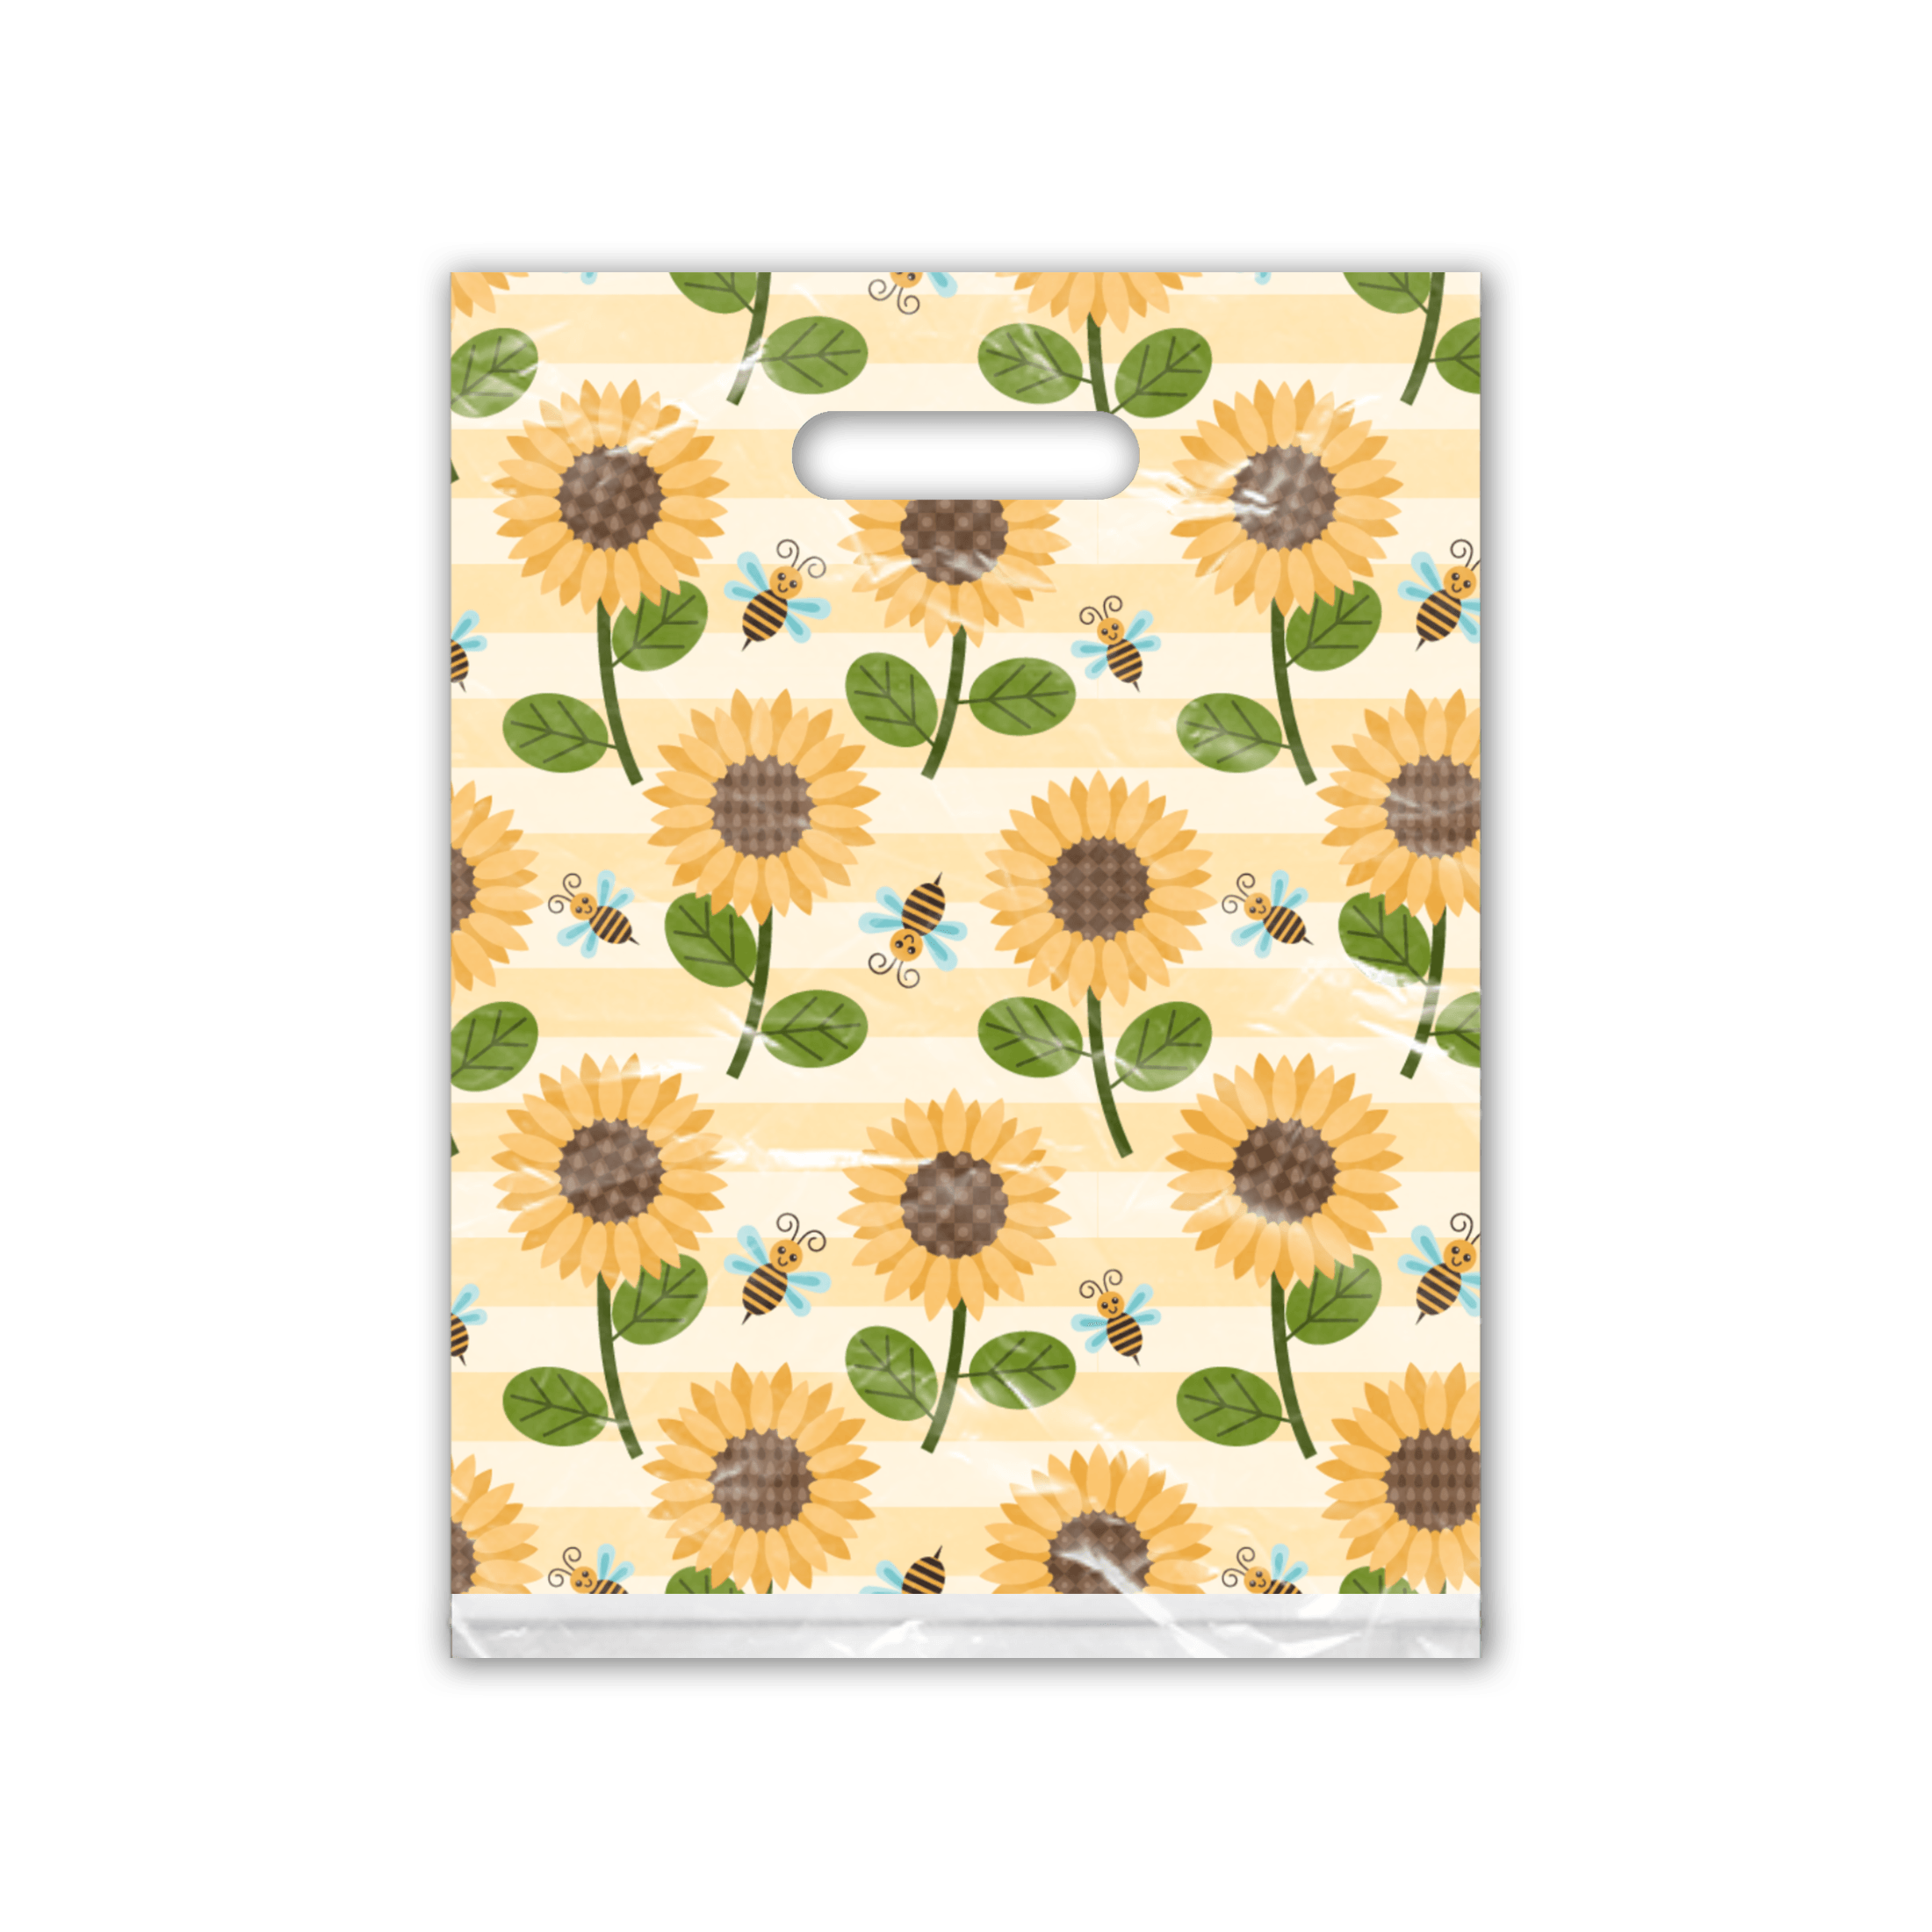 Sunflower and bees Designer Merchandise bags Pro supply Global